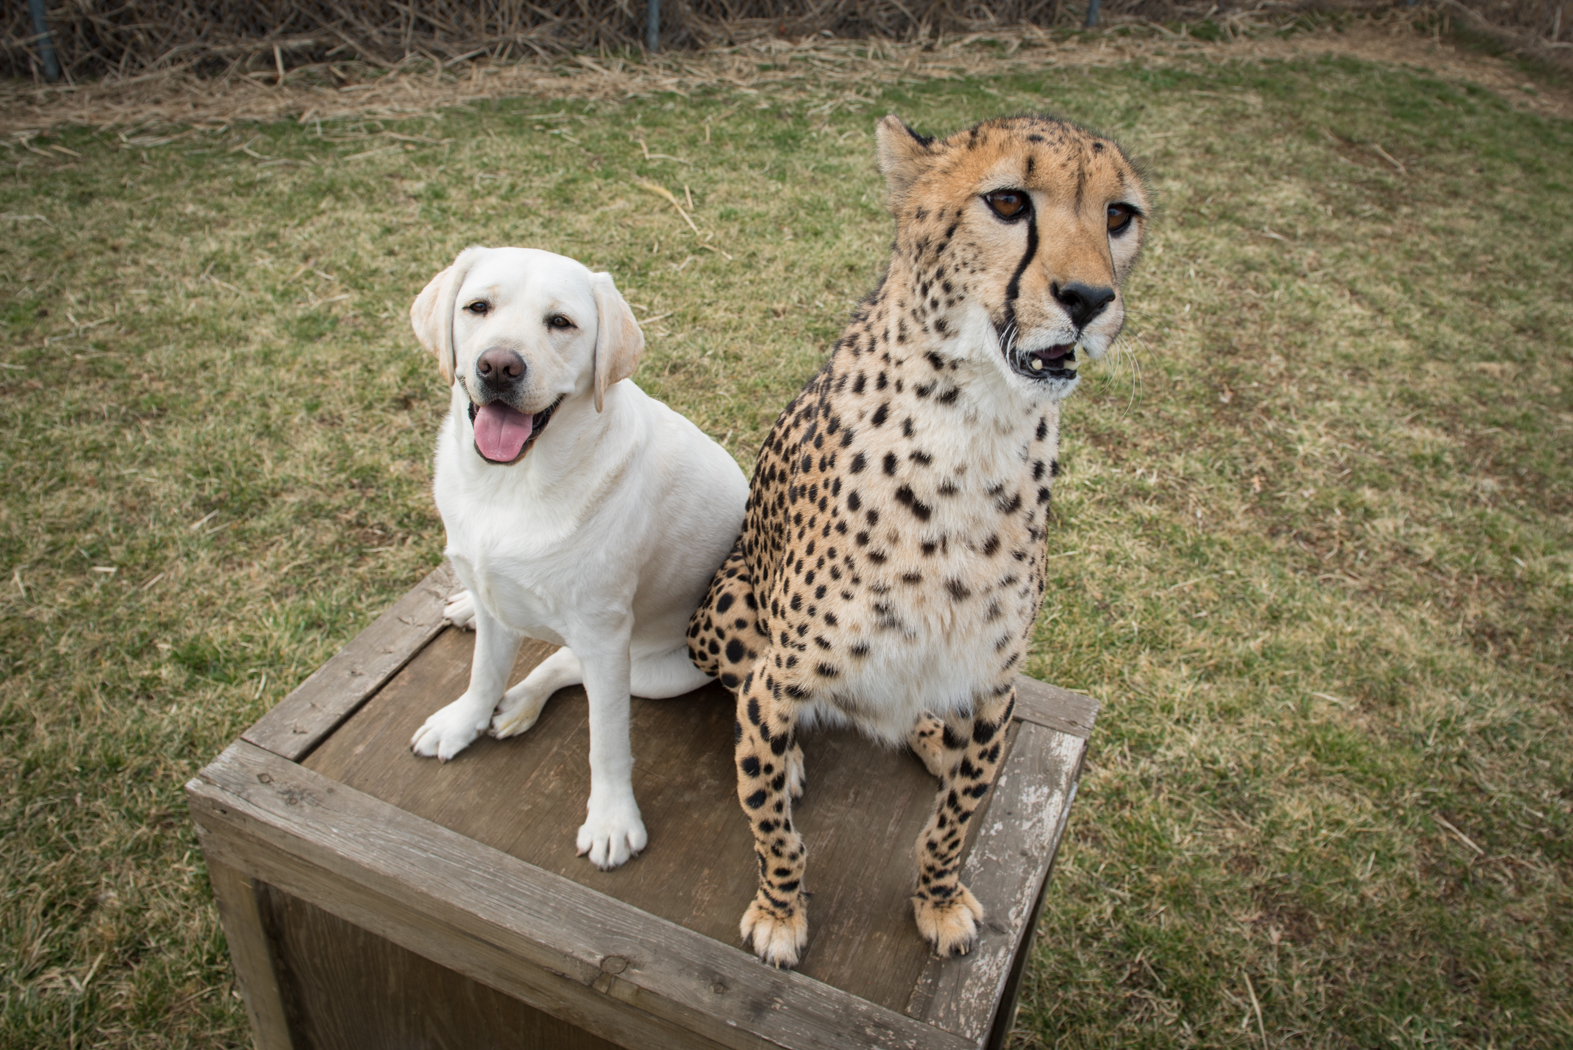 How unlikely friendship with dogs is saving endangered cheetahs - CBS News